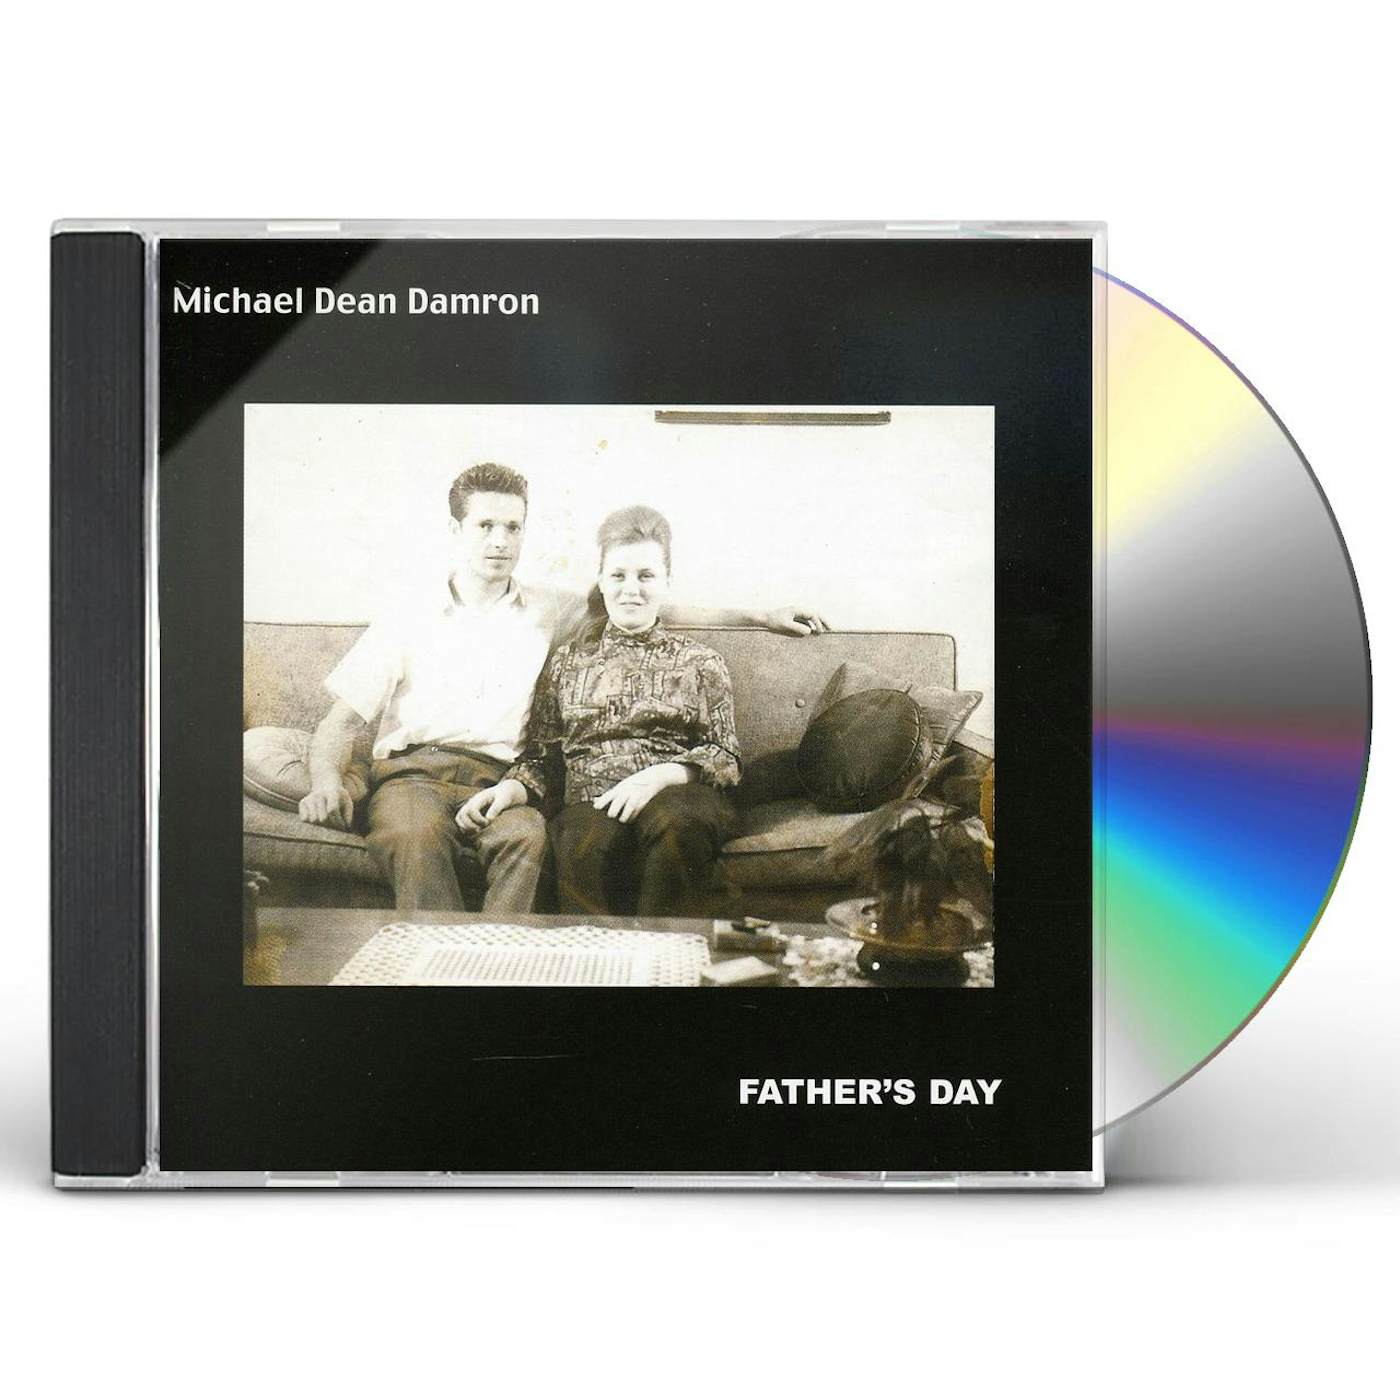 Michael Dean Damron FATHER'S DAY CD